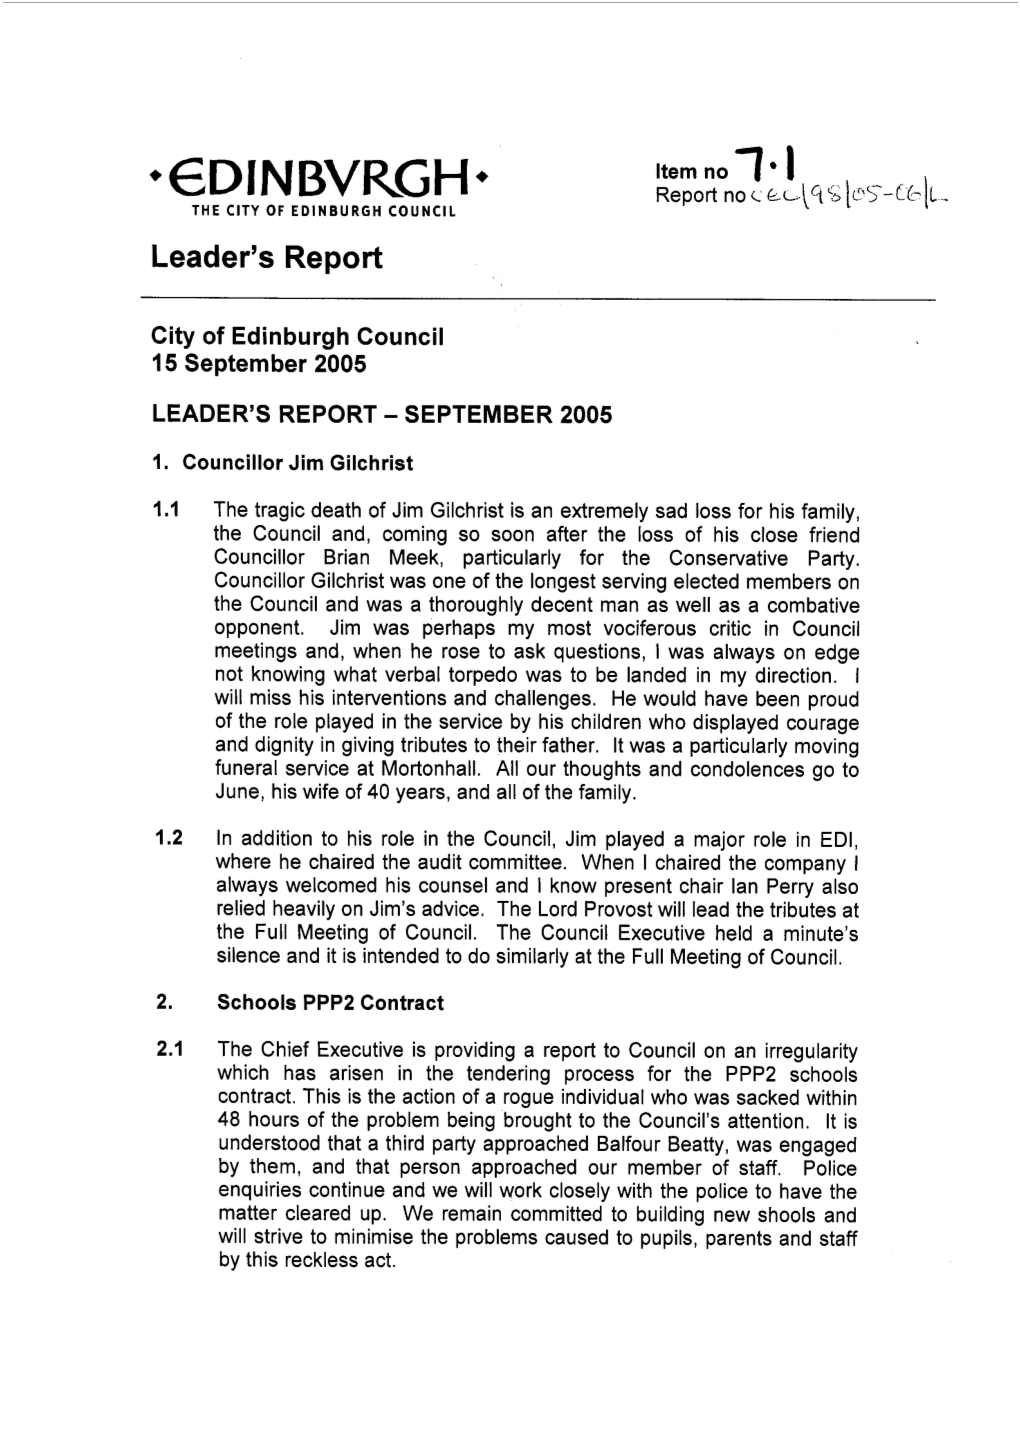 GD I N BVRG H+ the CITY of EDINBURGH COUNCIL Leader’S Report